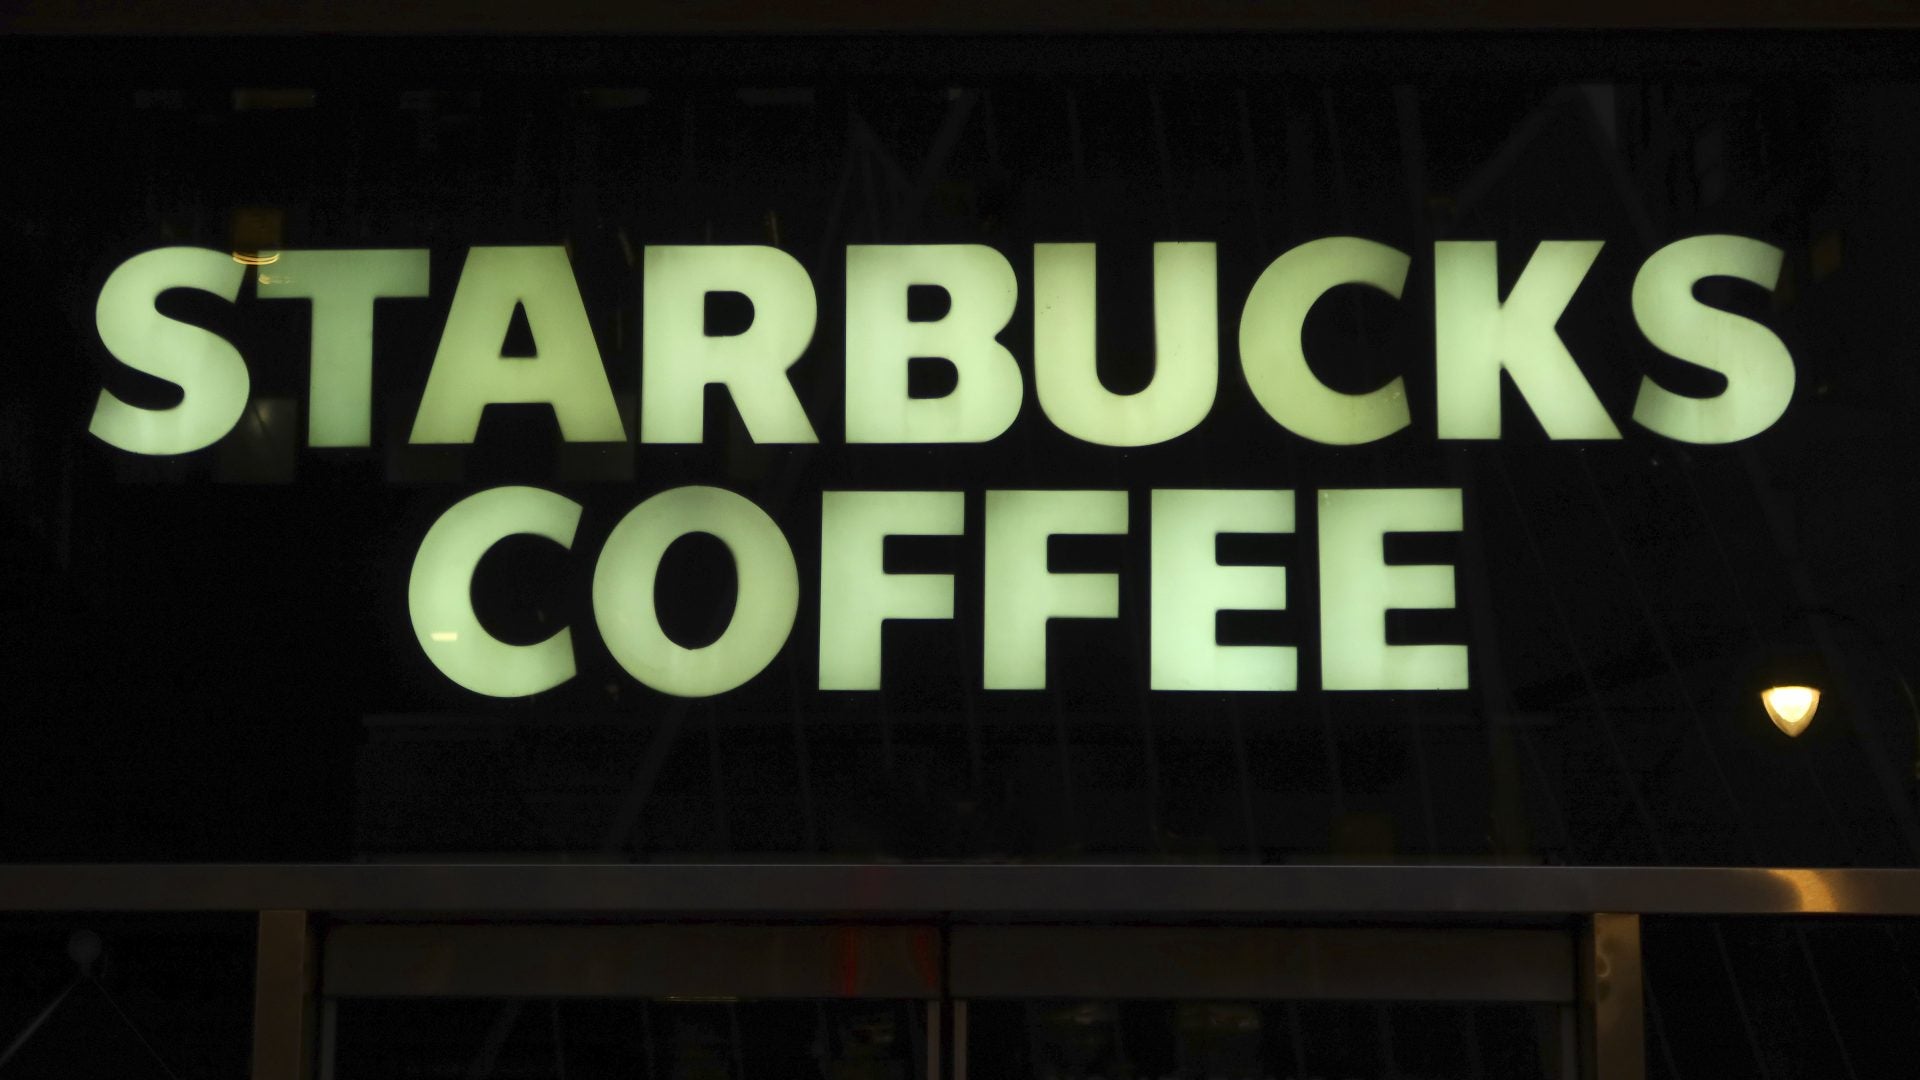 Starbucks To Pay Former Manager $25.6 Million After Lawsuit Alleging She Was Fired For Being White